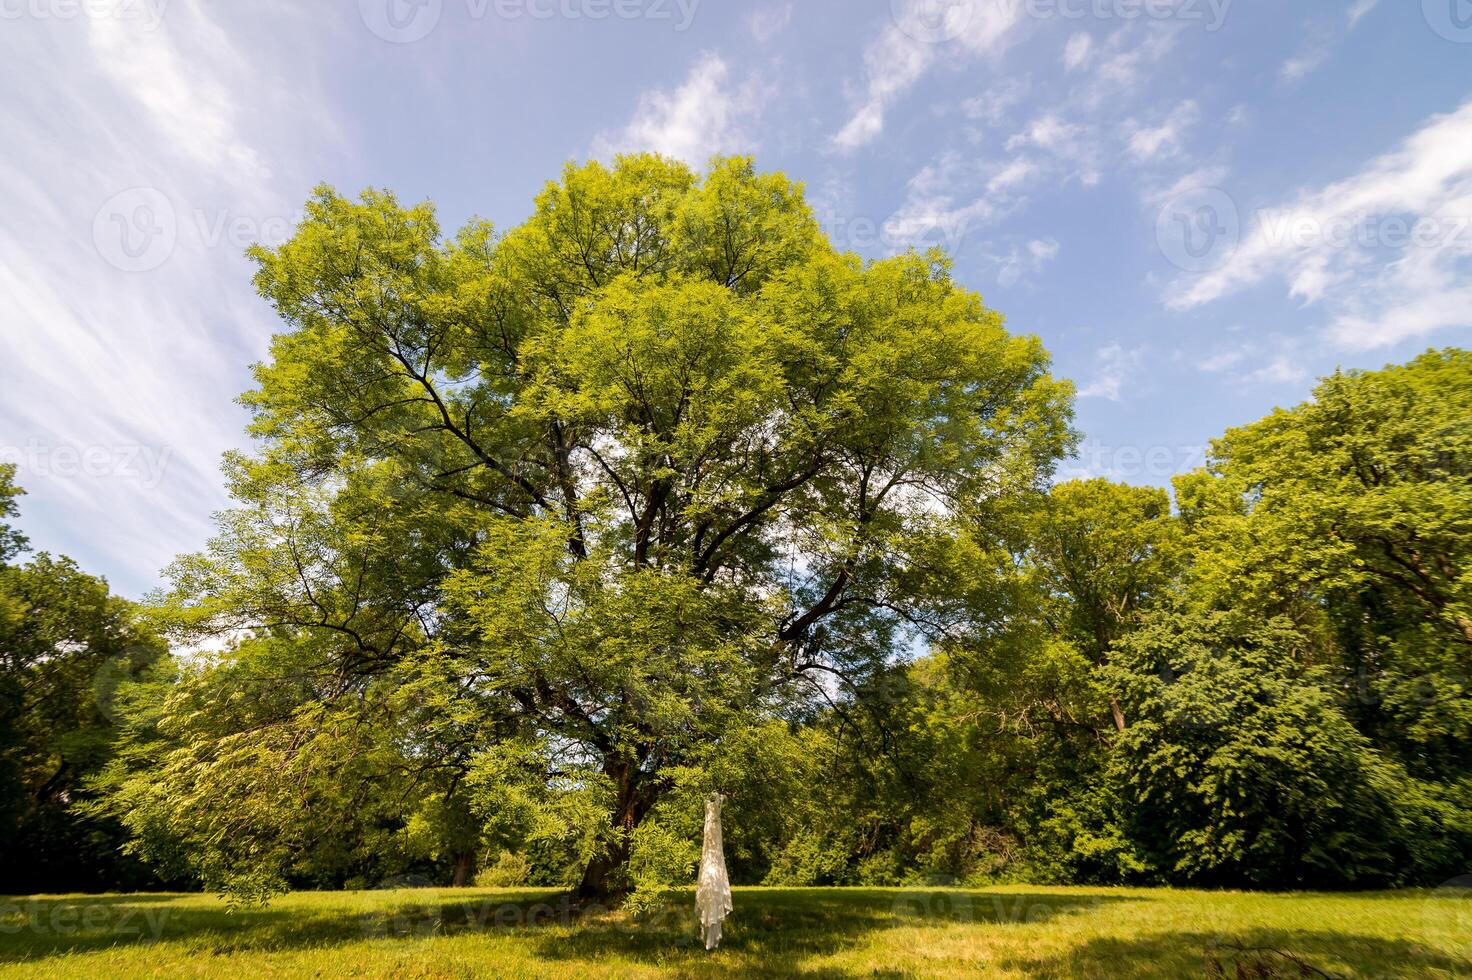 The Bridal wedding dress hanging on the tree branches. Tree in a meadow photo